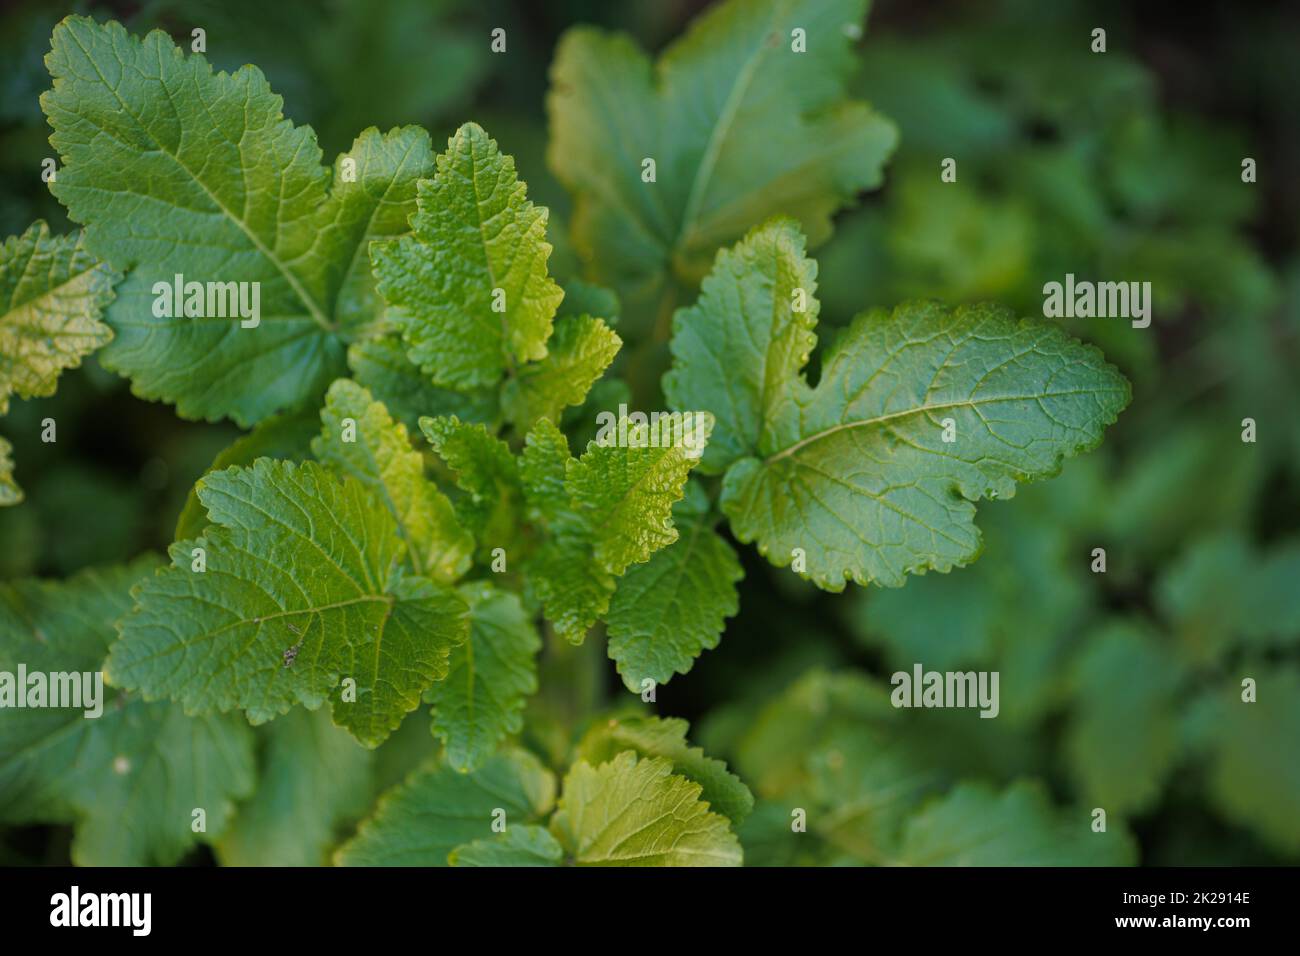 Mustard plant with green leaves in closeup Stock Photo